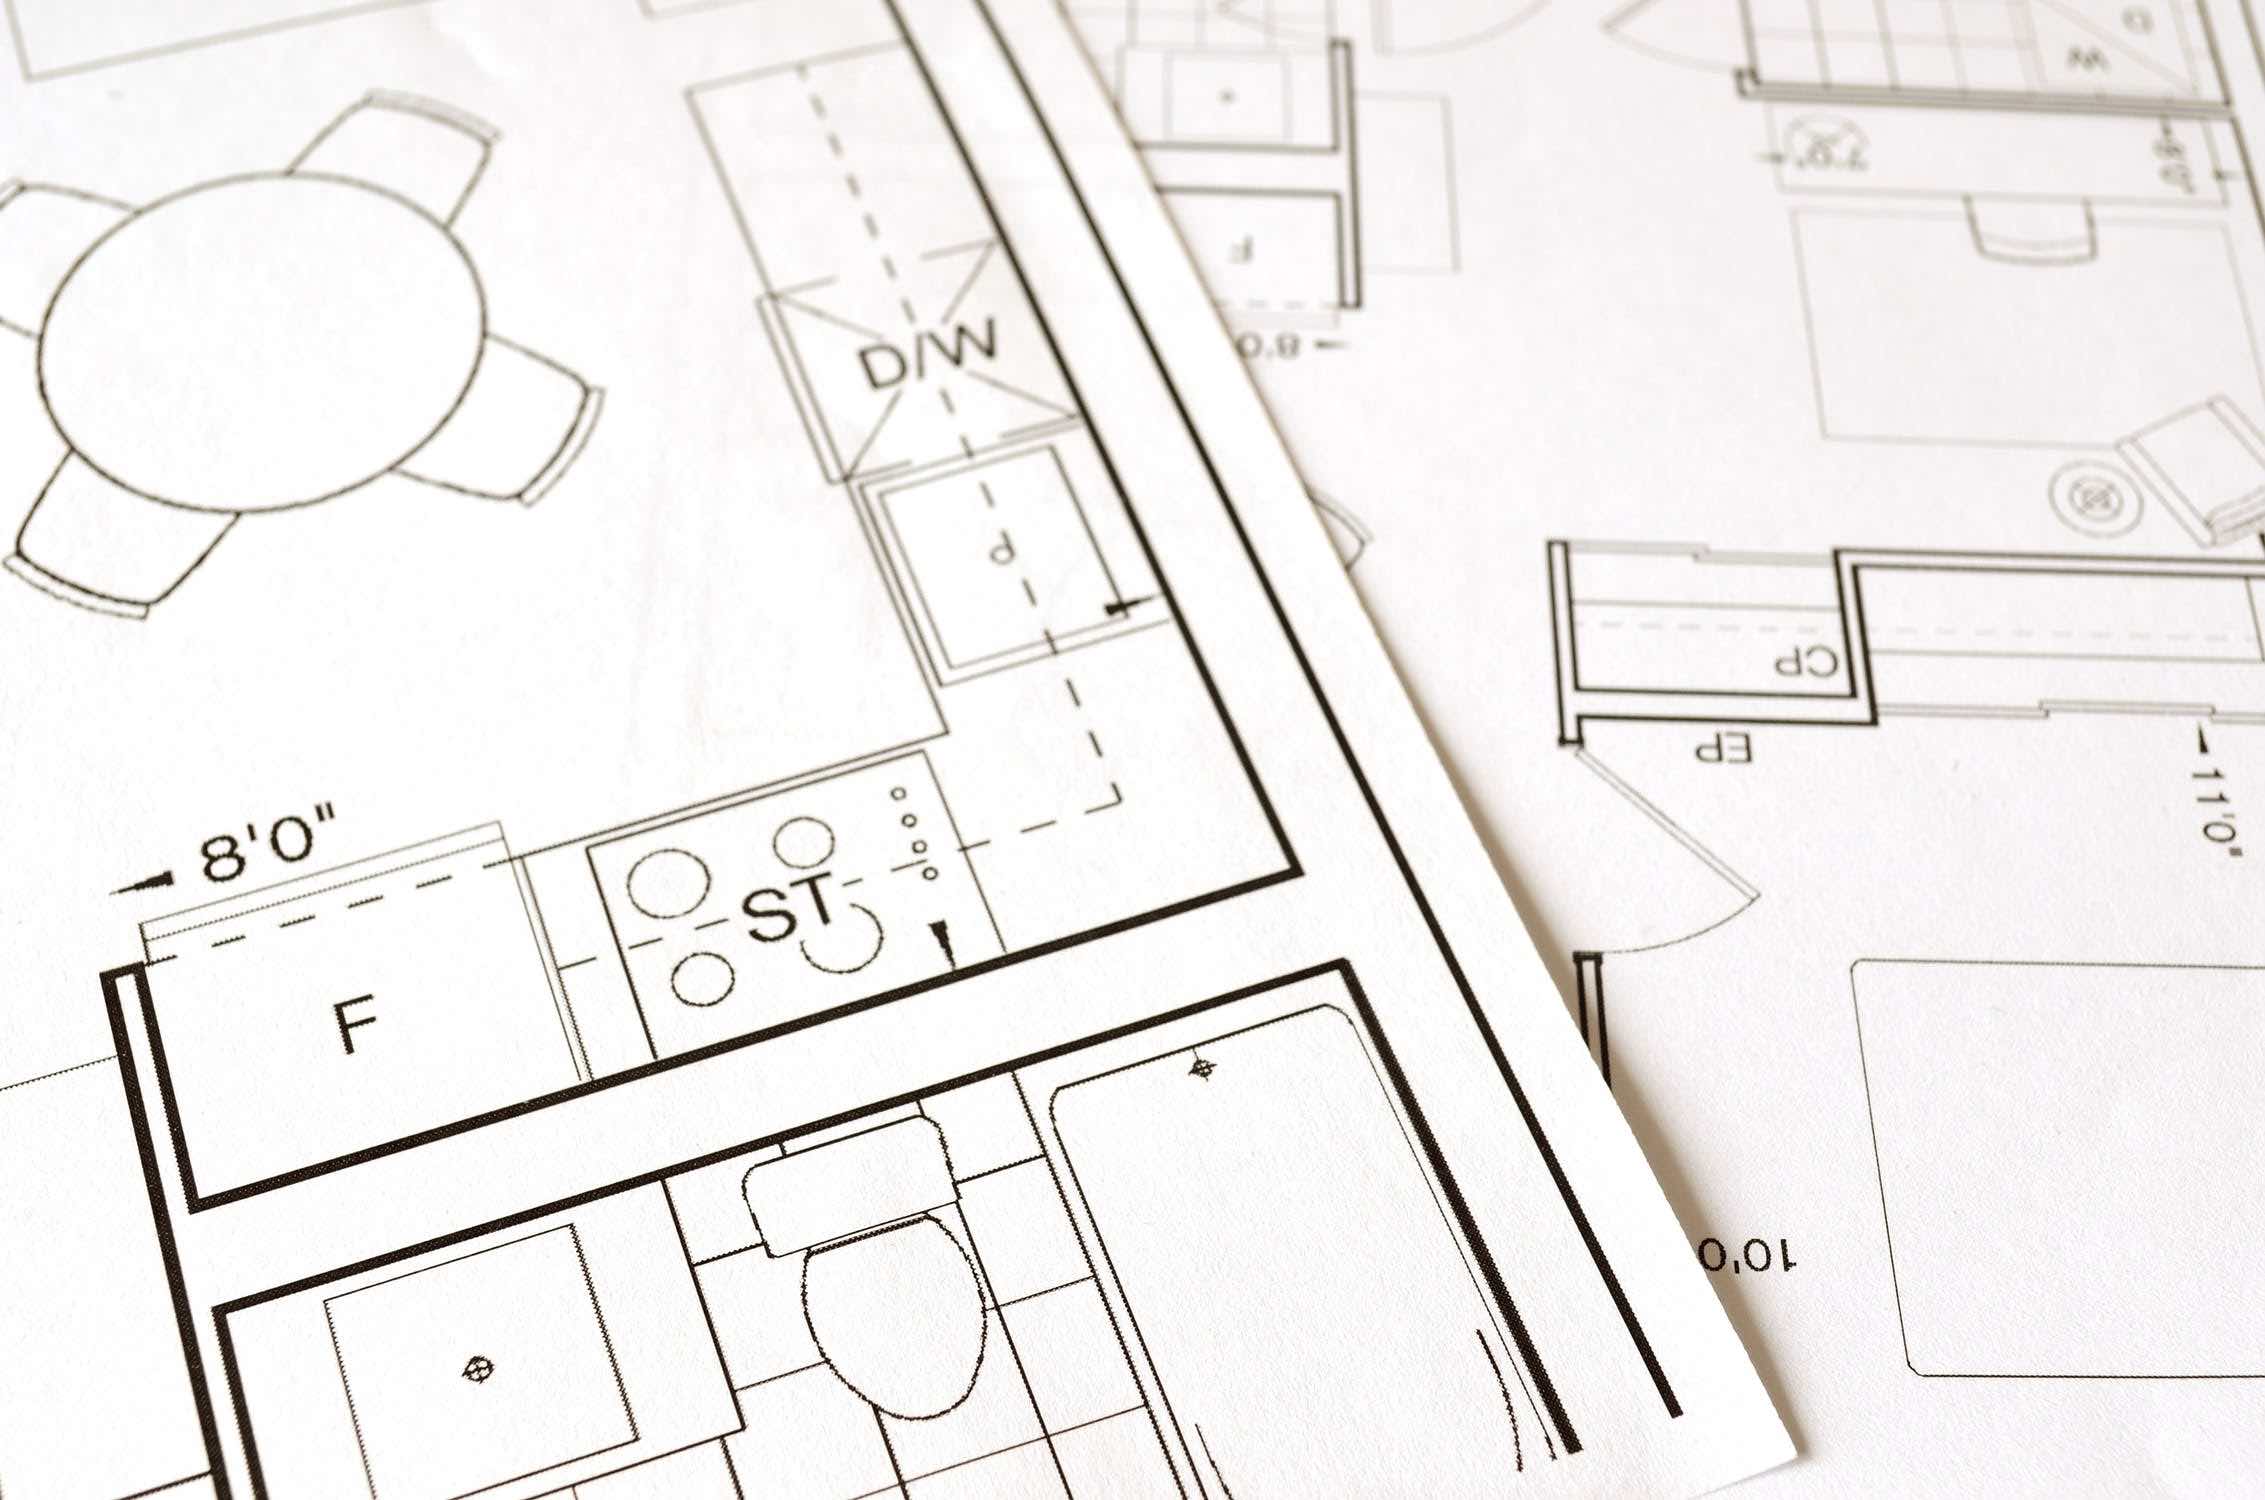 blueprints for a house drawn with pencil on white paper